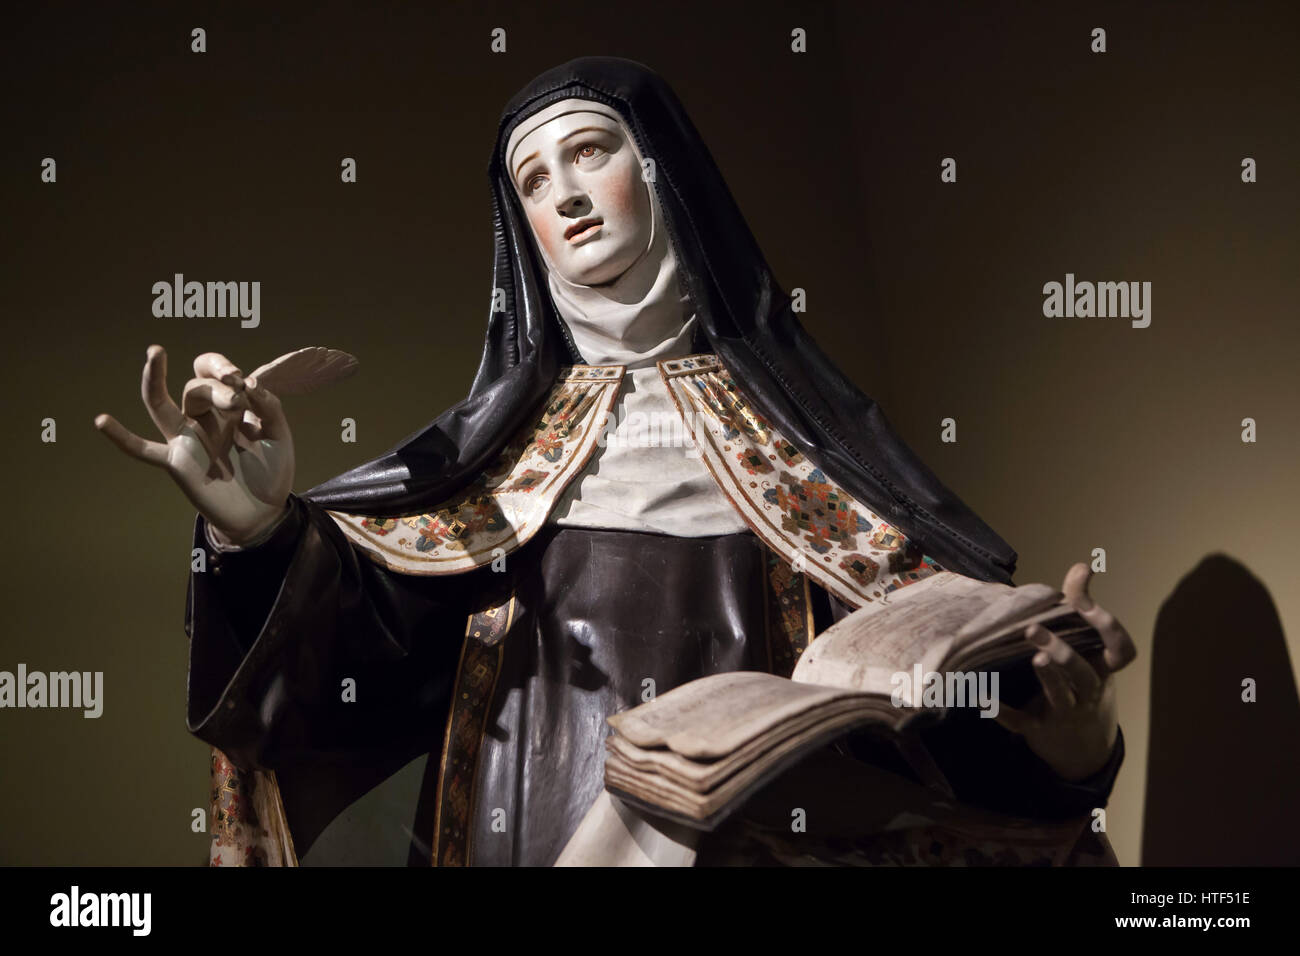 Saint Teresa of Avila. Polychrome wooden statue by Spanish Baroque sculptor Gregorio Fernandez (1625) on display at the exhibition in the Kunsthalle Munchen in Munich, Bavaria, Germany. The exhibition devoted to the Spanish Golden Age runs till 26 March 2017. Stock Photo